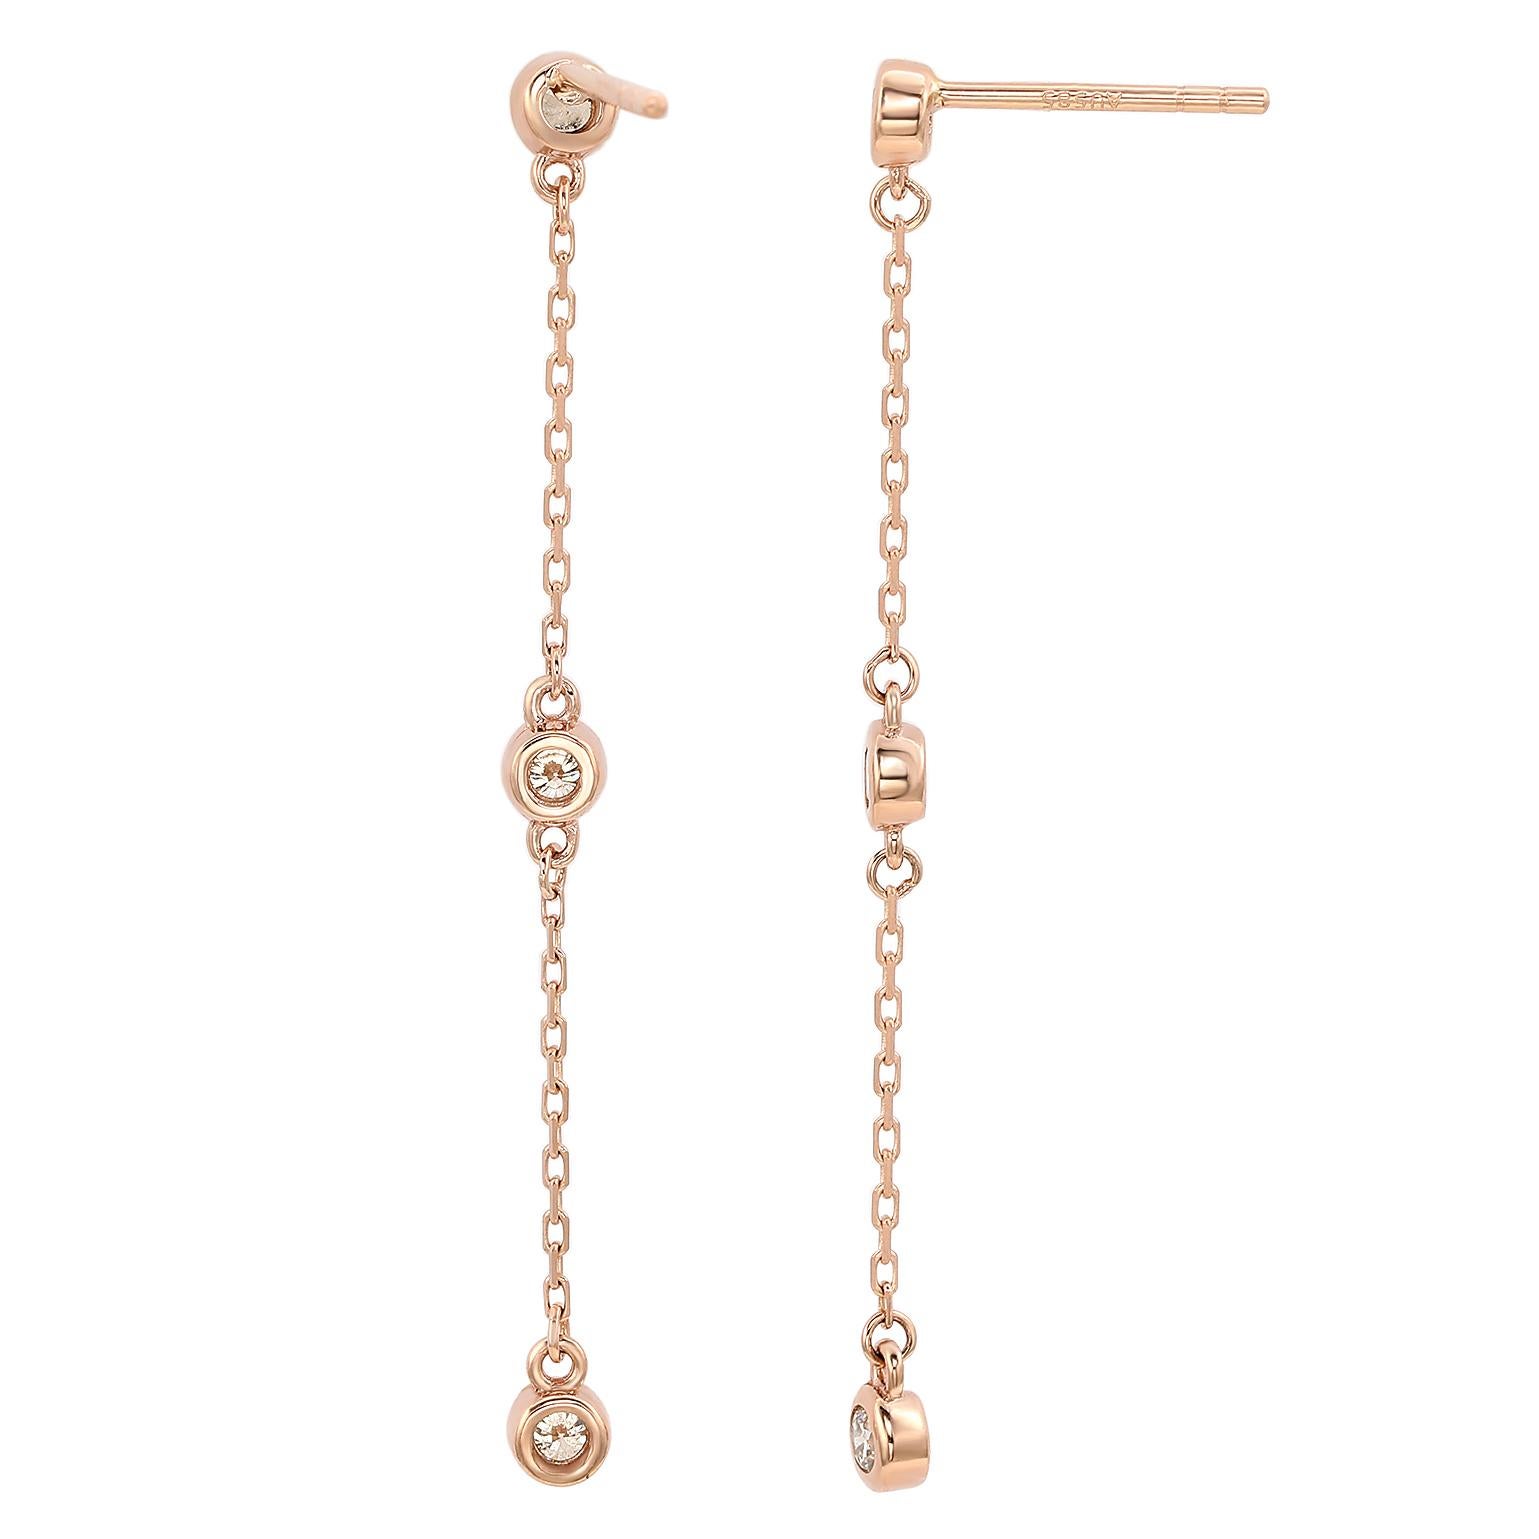 A touch of dazzle and a lot of style, these dangle earrings add a fashionable touch to any attire. Sleek and polished in solid rose gold, these stylish earrings showcase a station design of bezel set 6 round cut white diamonds totaling 4/5 CTTW.